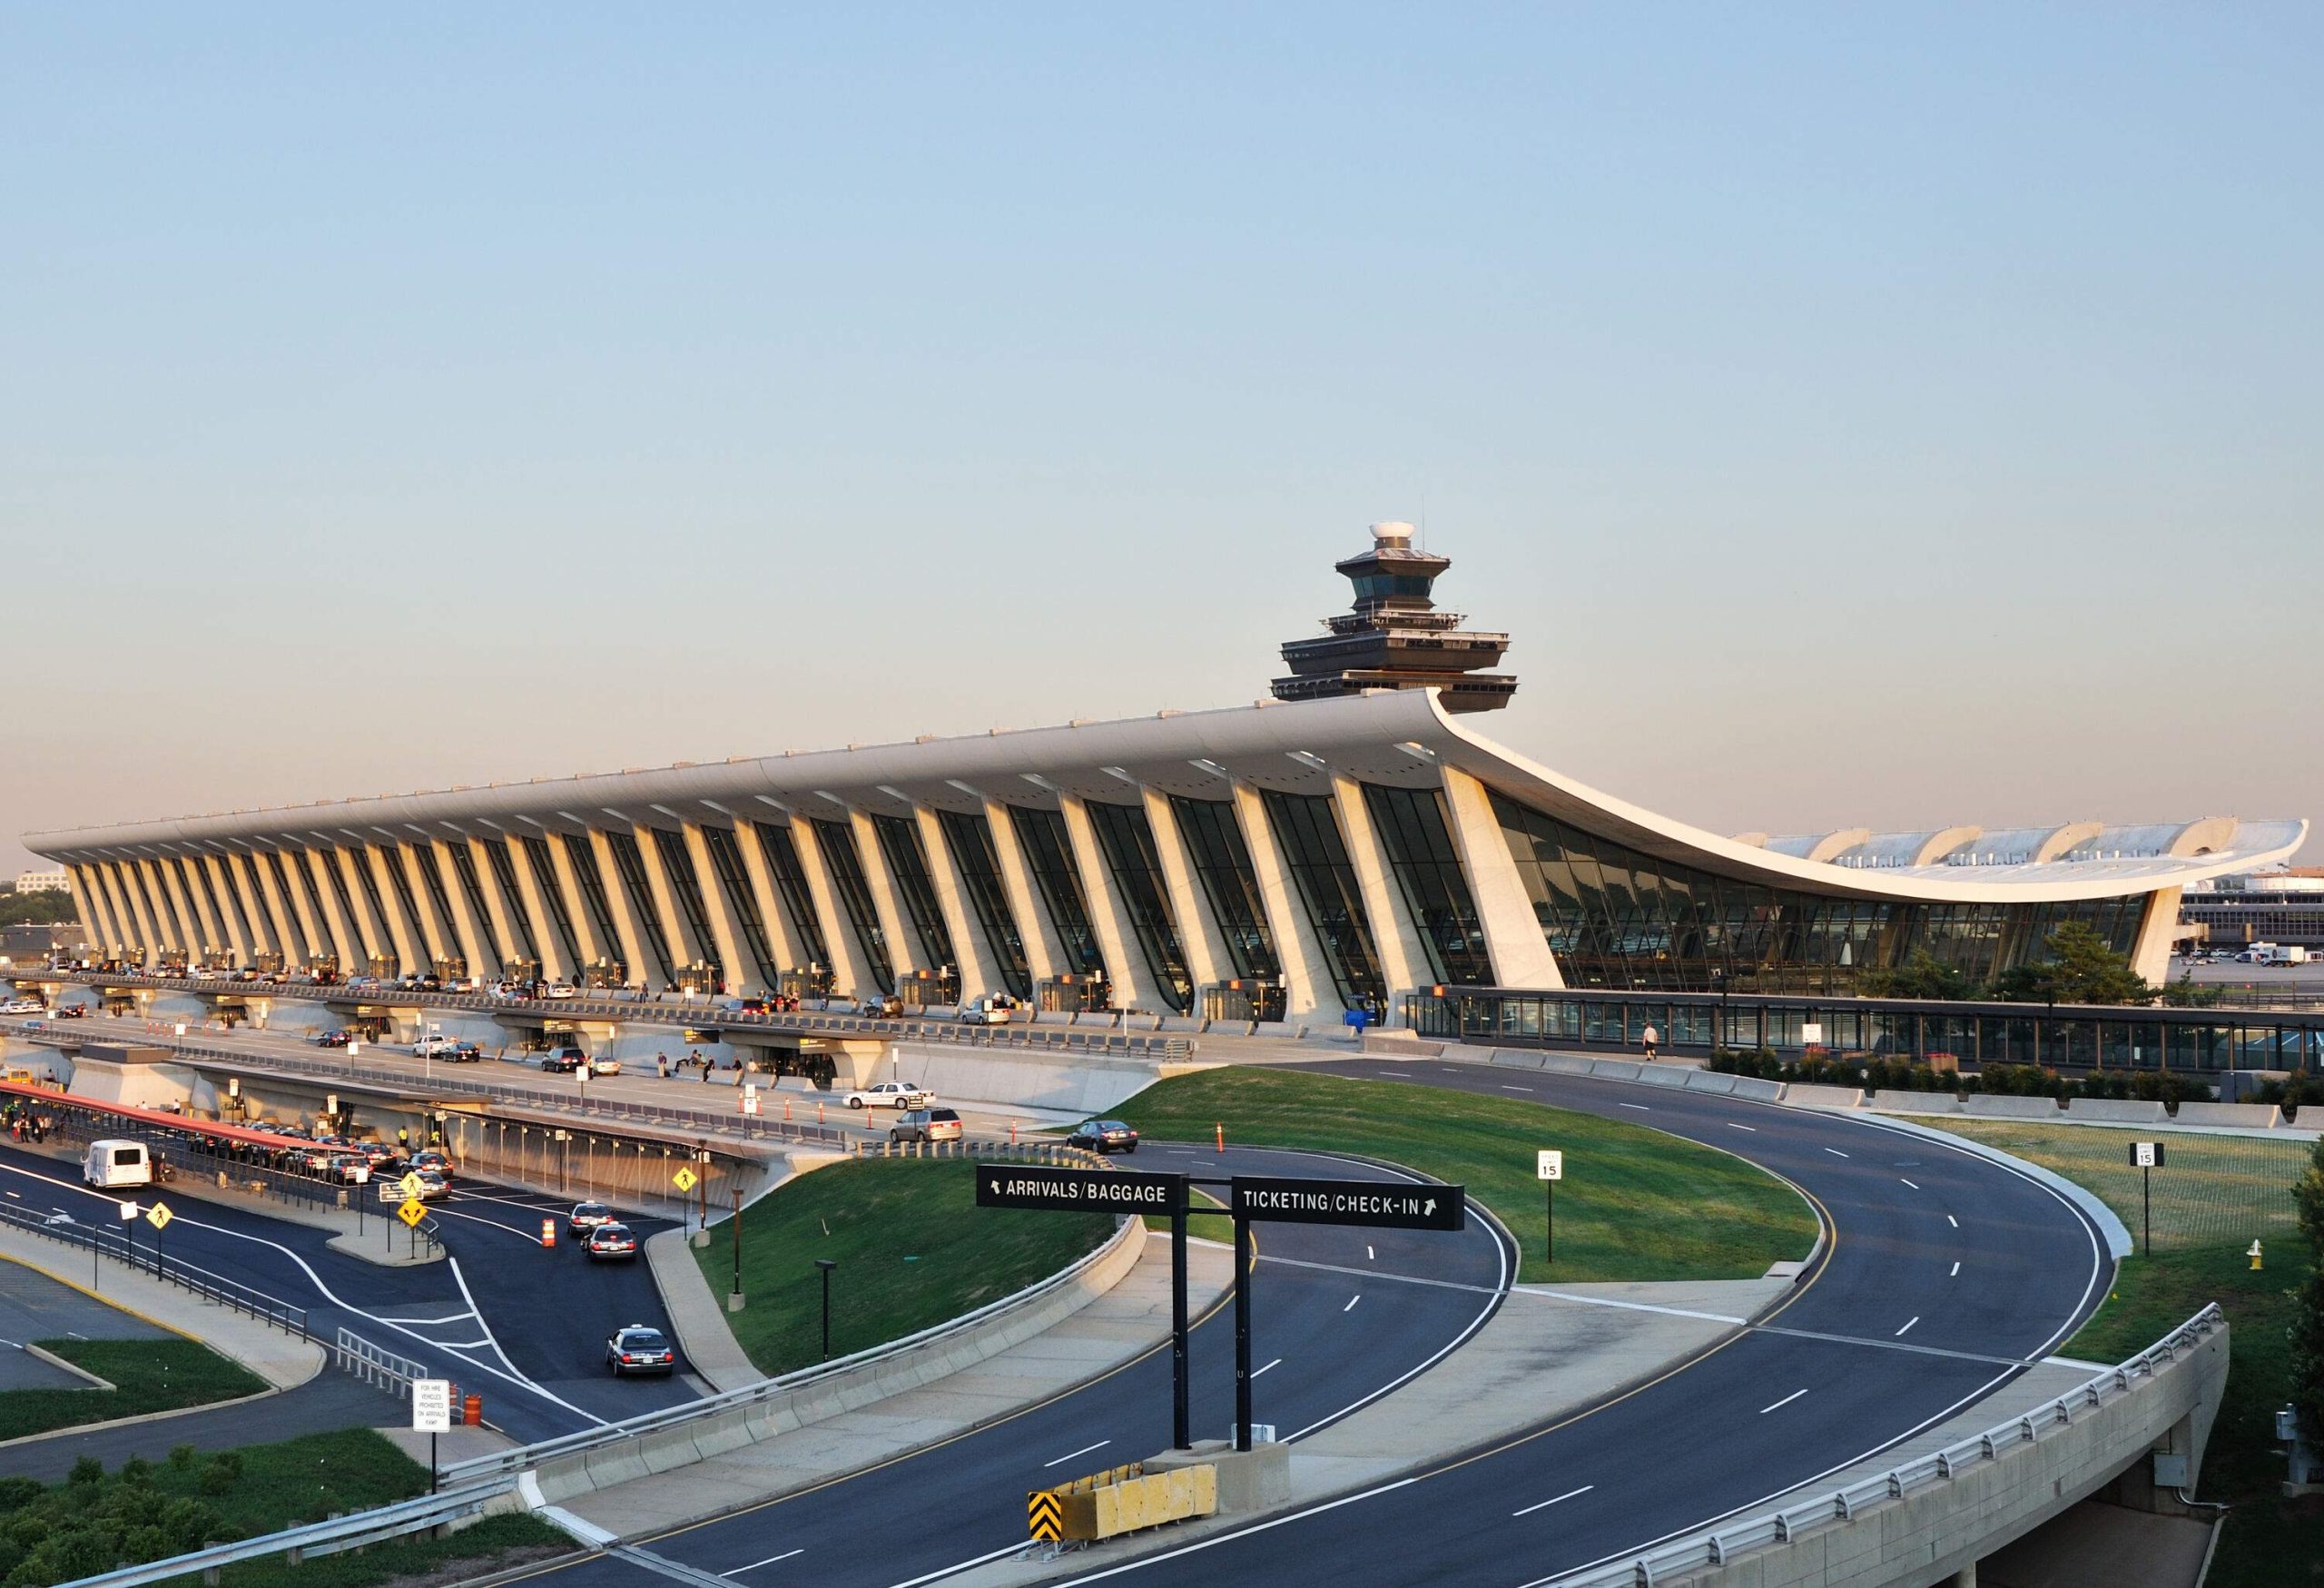 The main terminal of Washington Dulles International Airport is characterised by its iconic curved design and expansive glass windows, fronted by a series of roads leading to it.